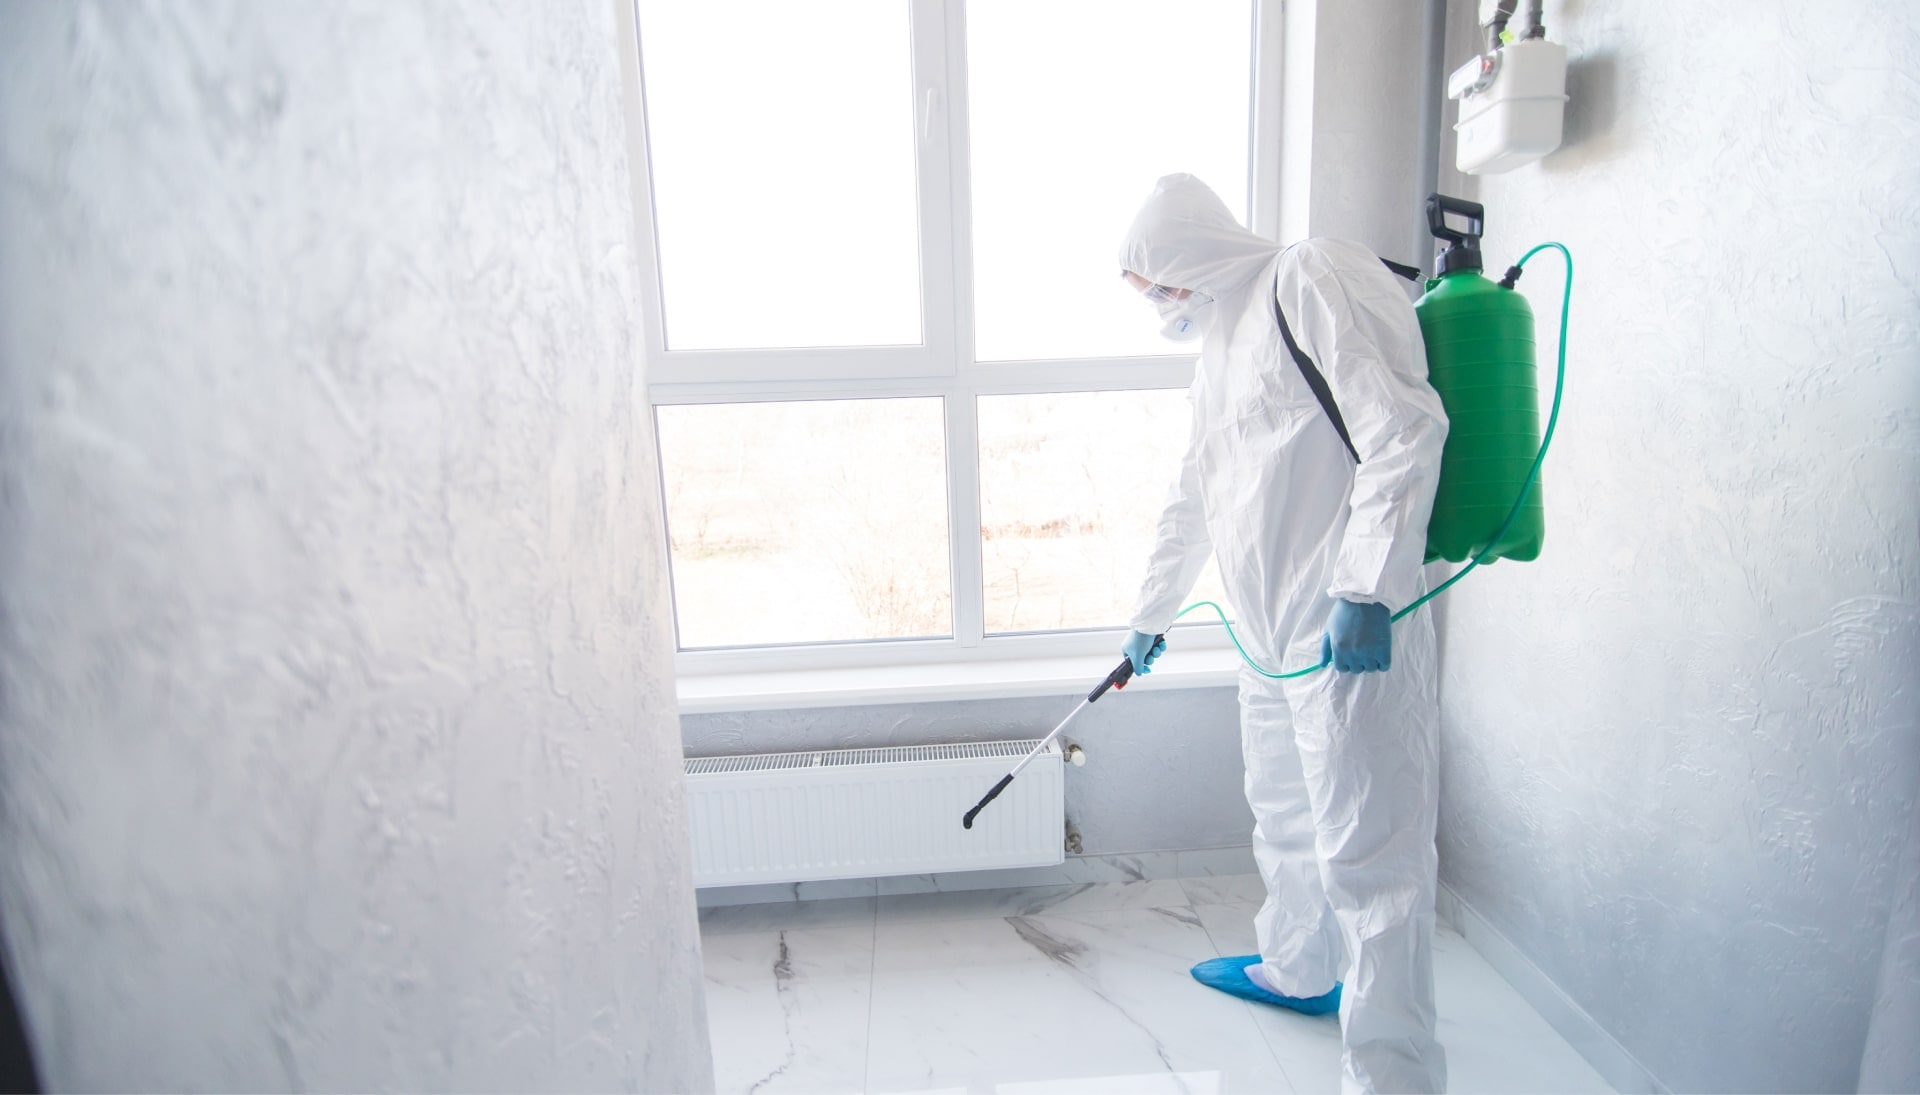 We provide the highest-quality mold inspection, testing, and removal services in the Caldwell, New Jersey area.